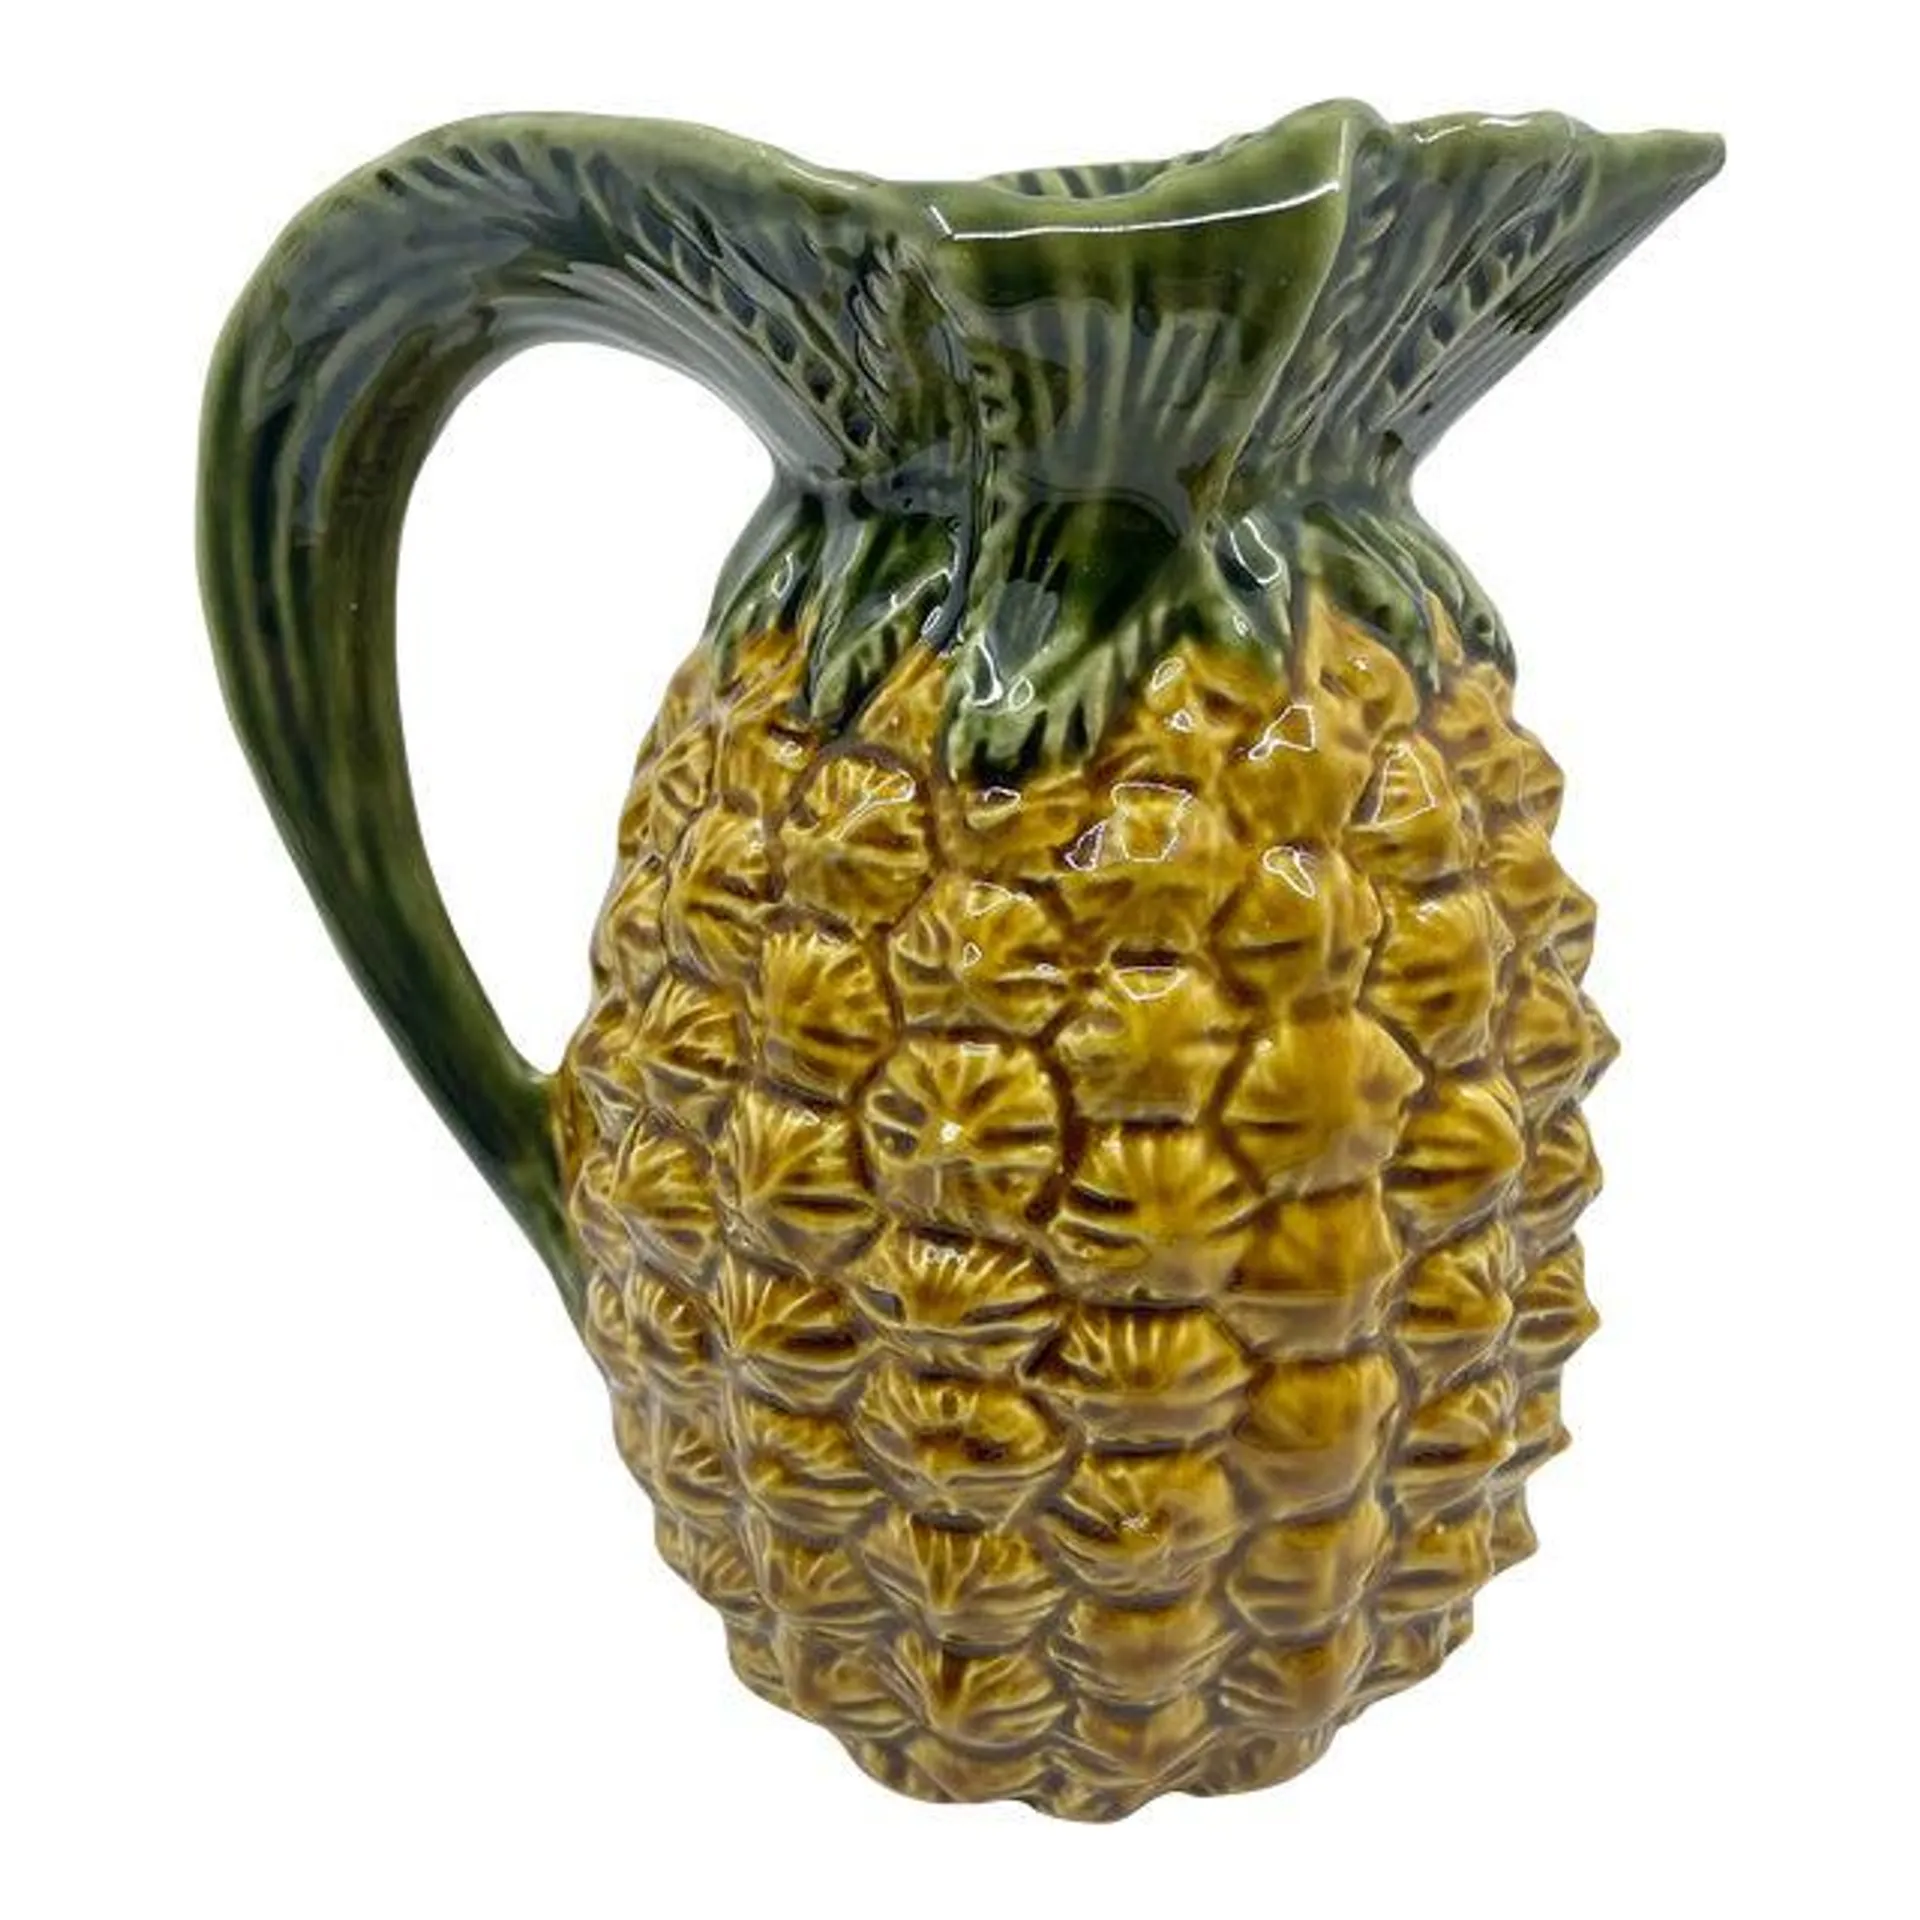 Vintage Pineapple Pitcher Made in Portugal